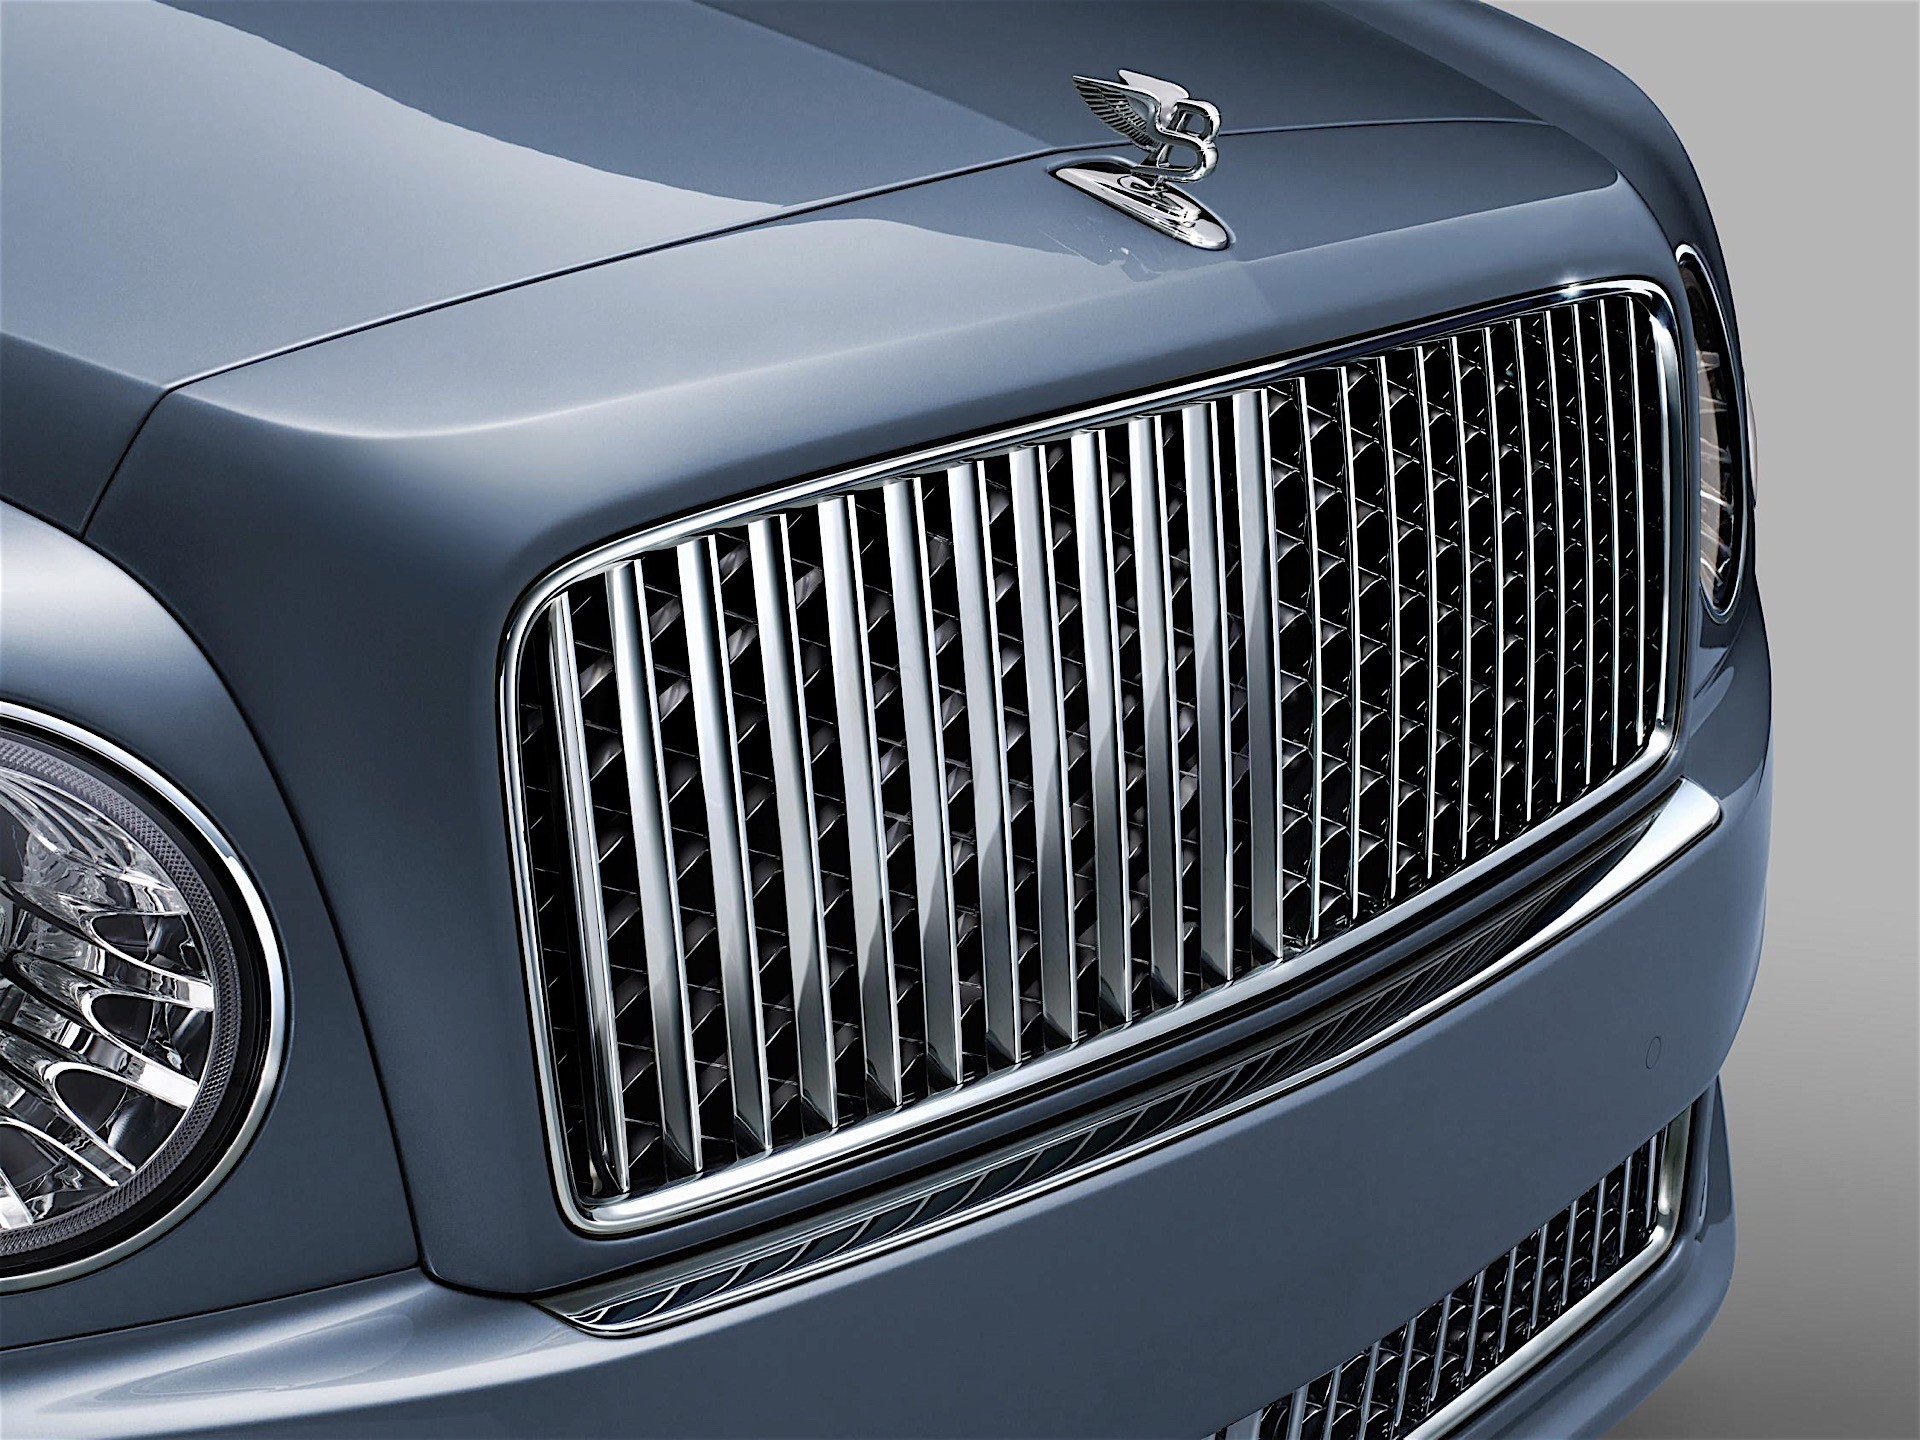 Bentley Facelift Revealed: New Grille, More Power New - autoevolution